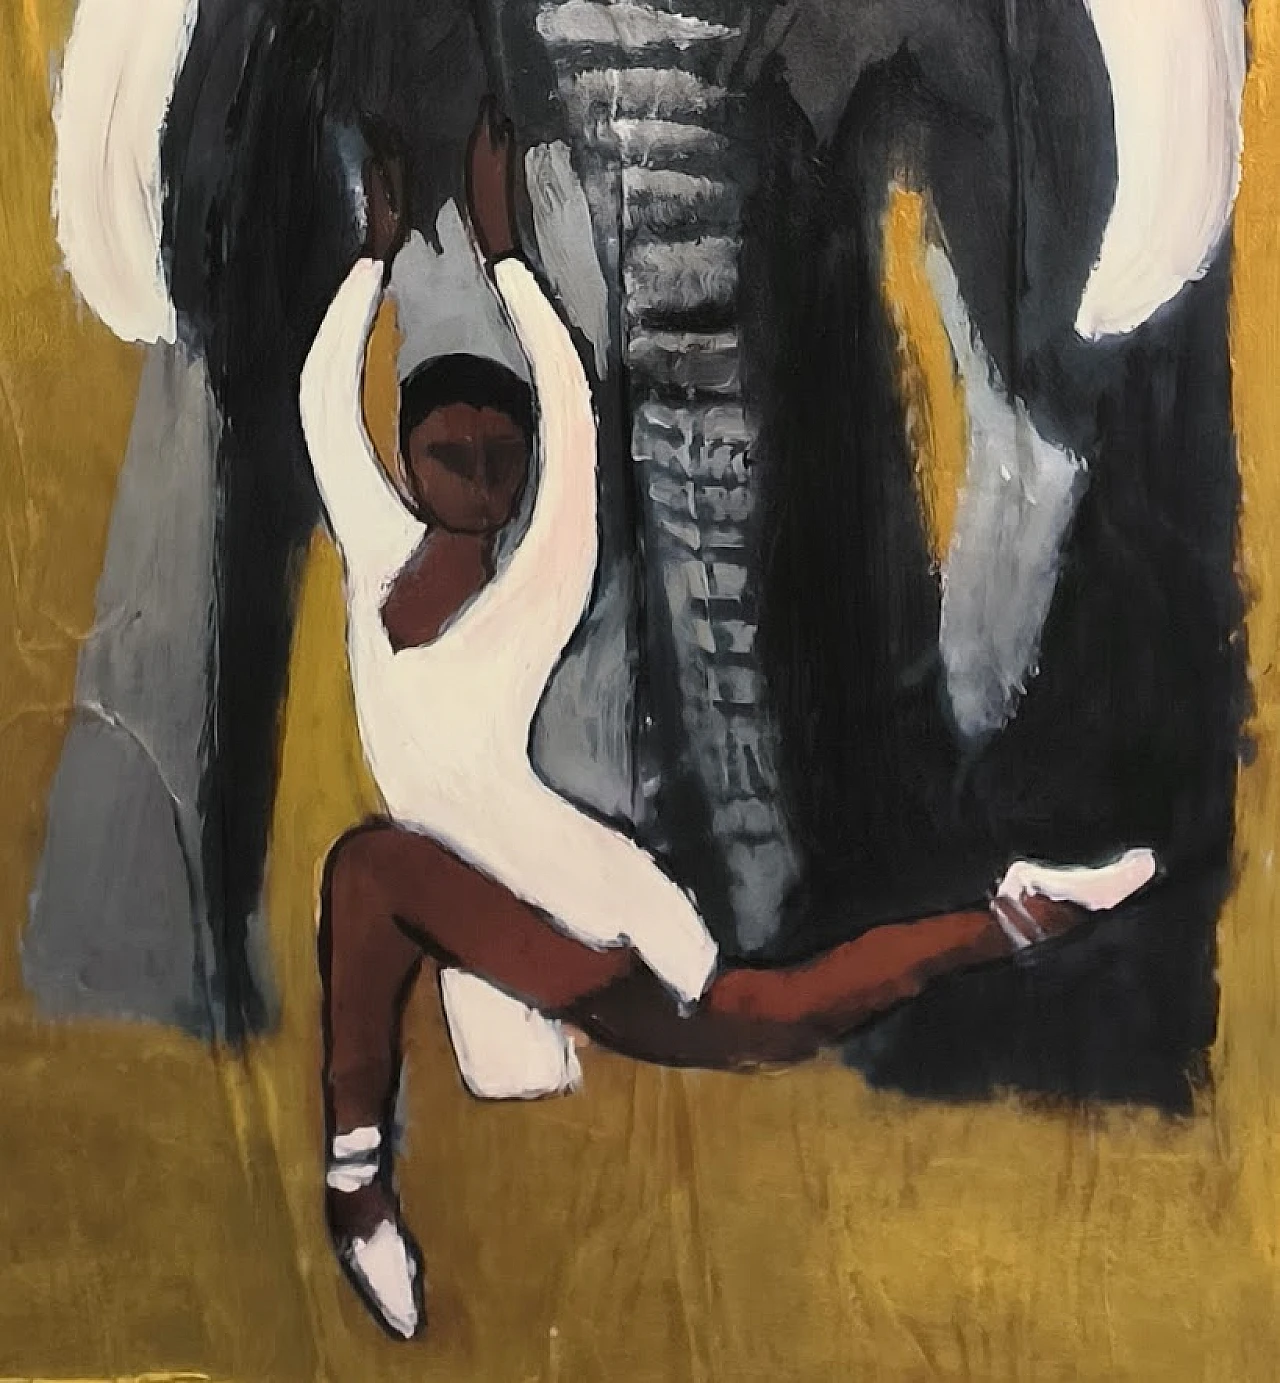 Bajo, Elephant and dancer, acrylic painting on canvas and paper, 2000 1